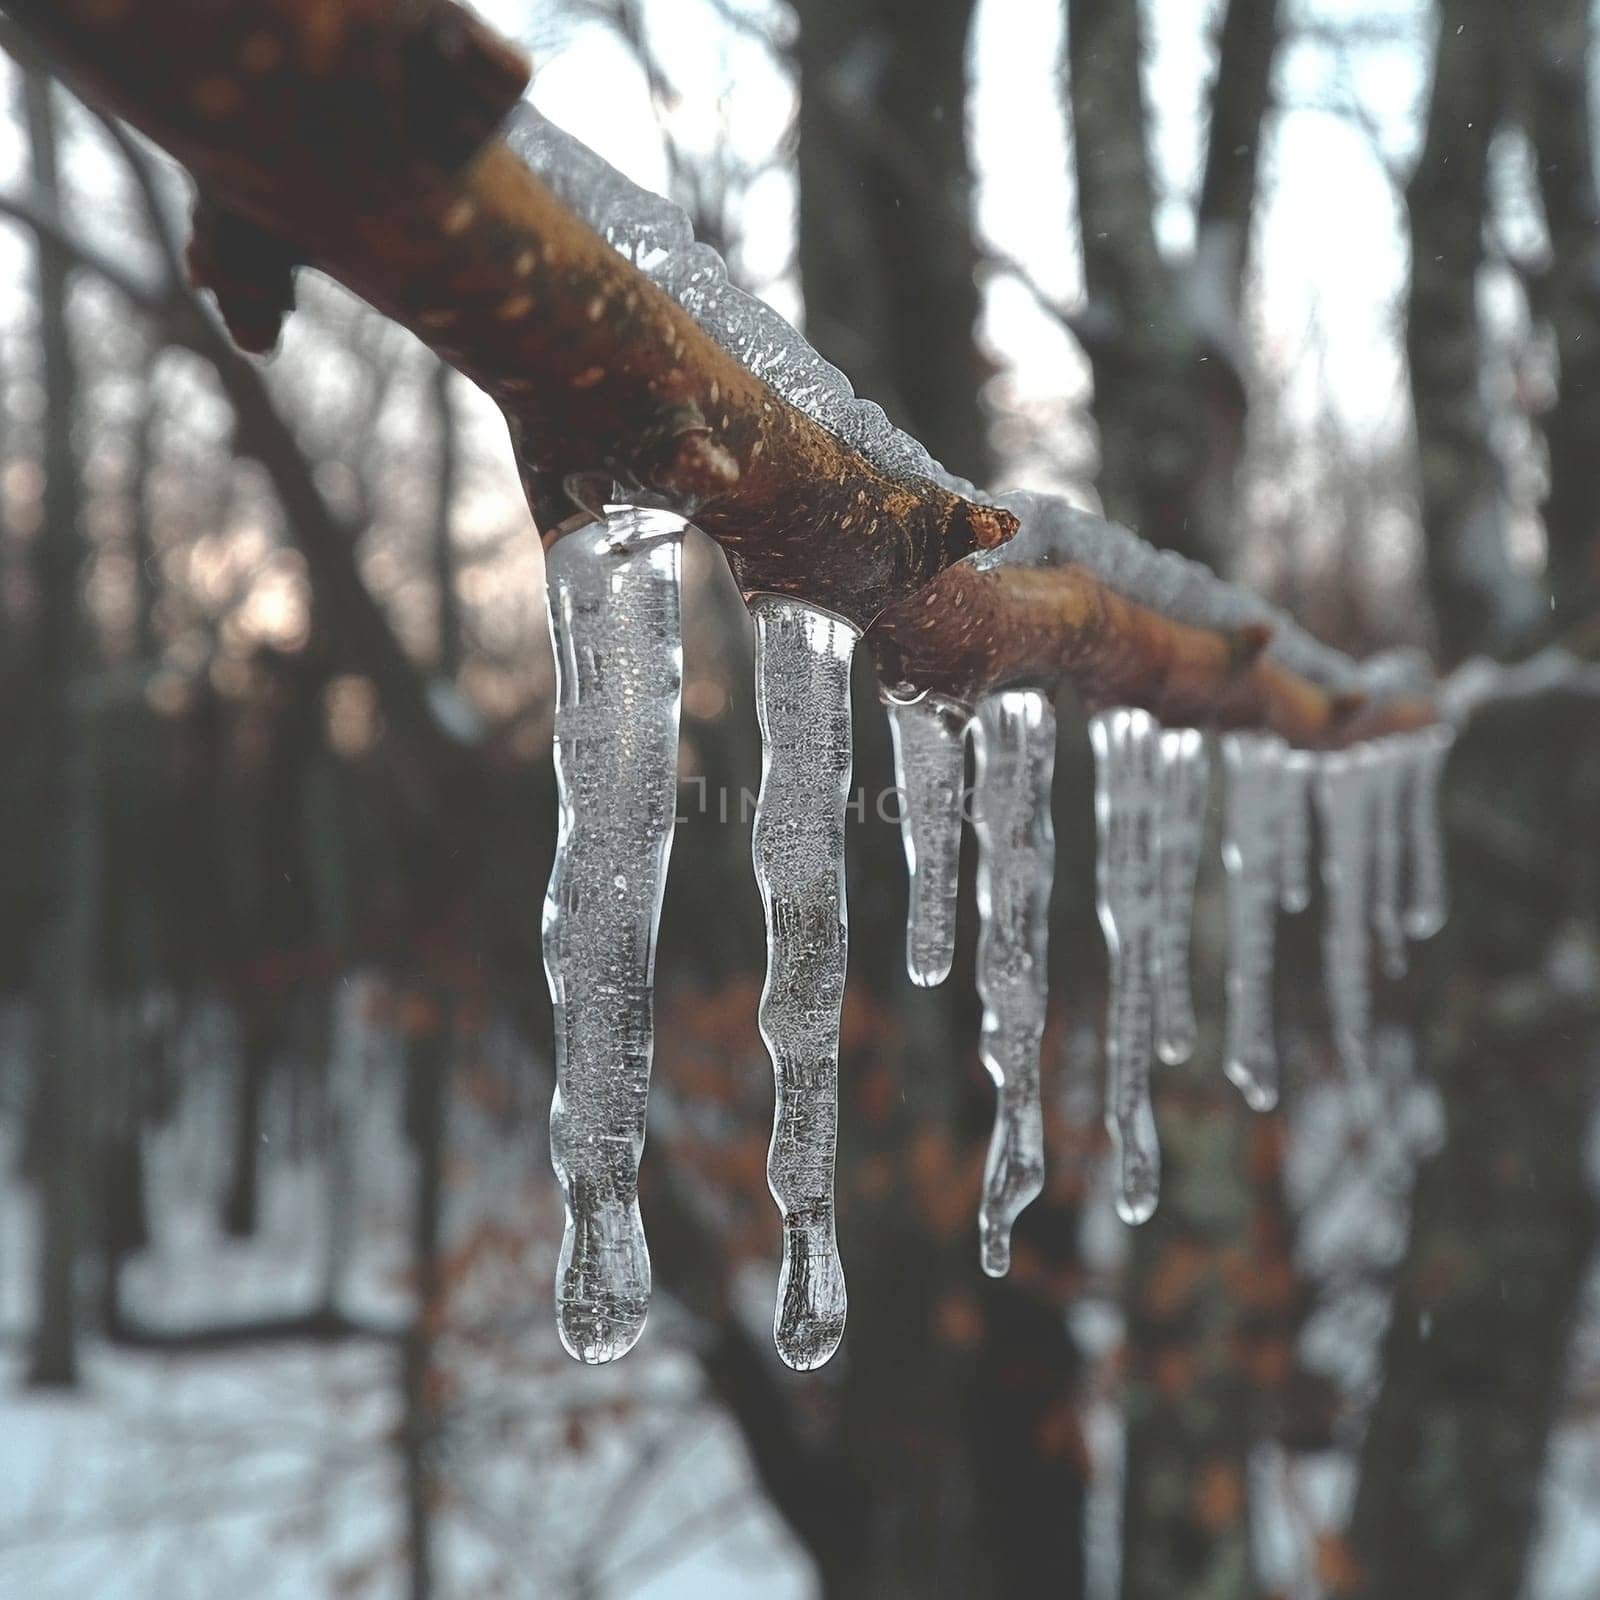 Frozen icicles hanging from a branch, capturing winter's chill and beauty.